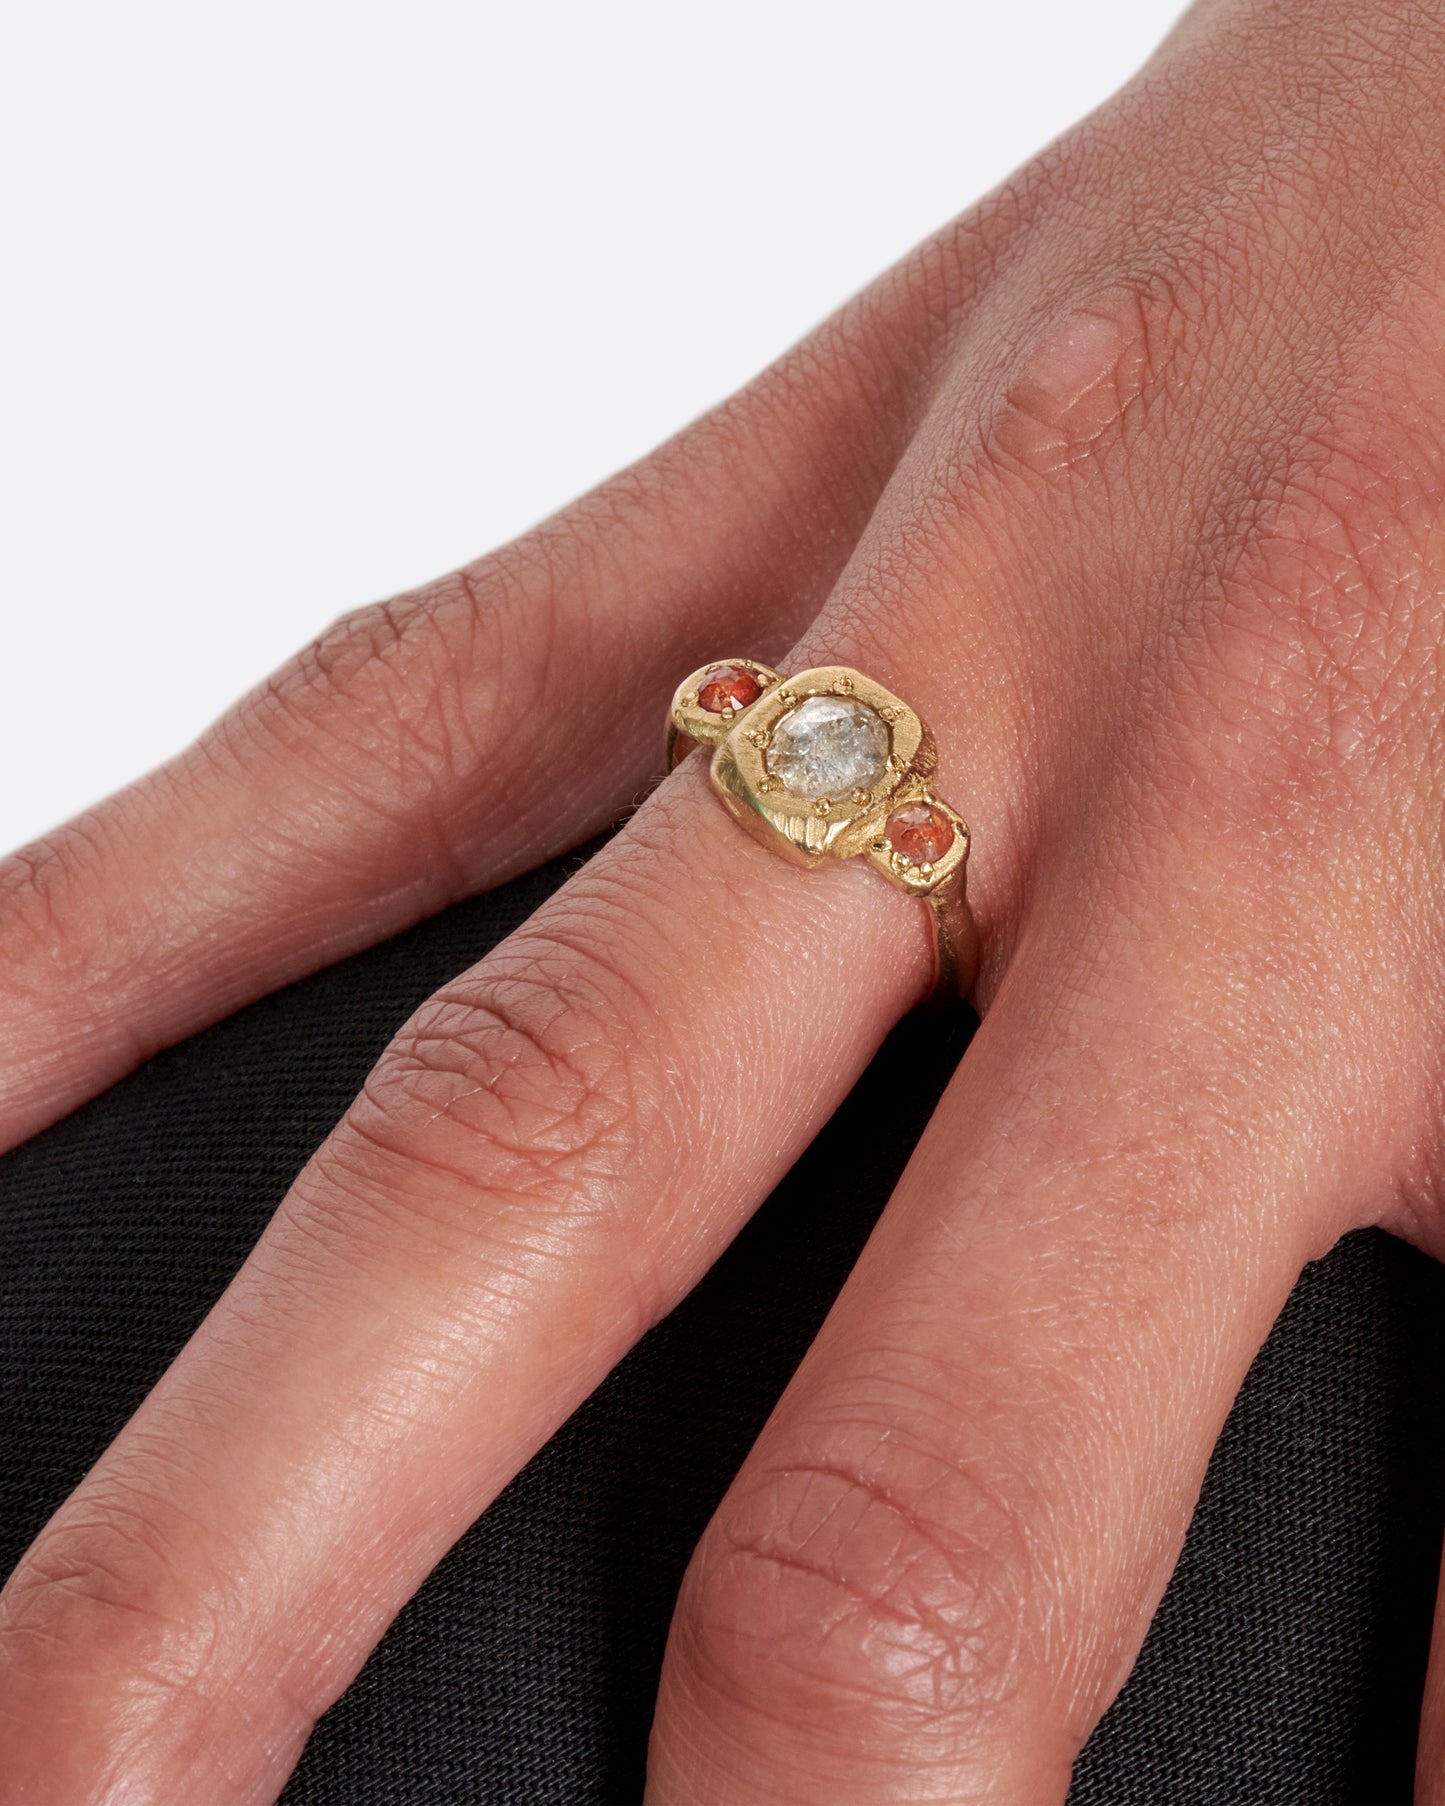 A one of a kind, organic take on a traditional three stone ring, featuring a rose cut grey diamond and two rose cut red diamonds, shown on a finger